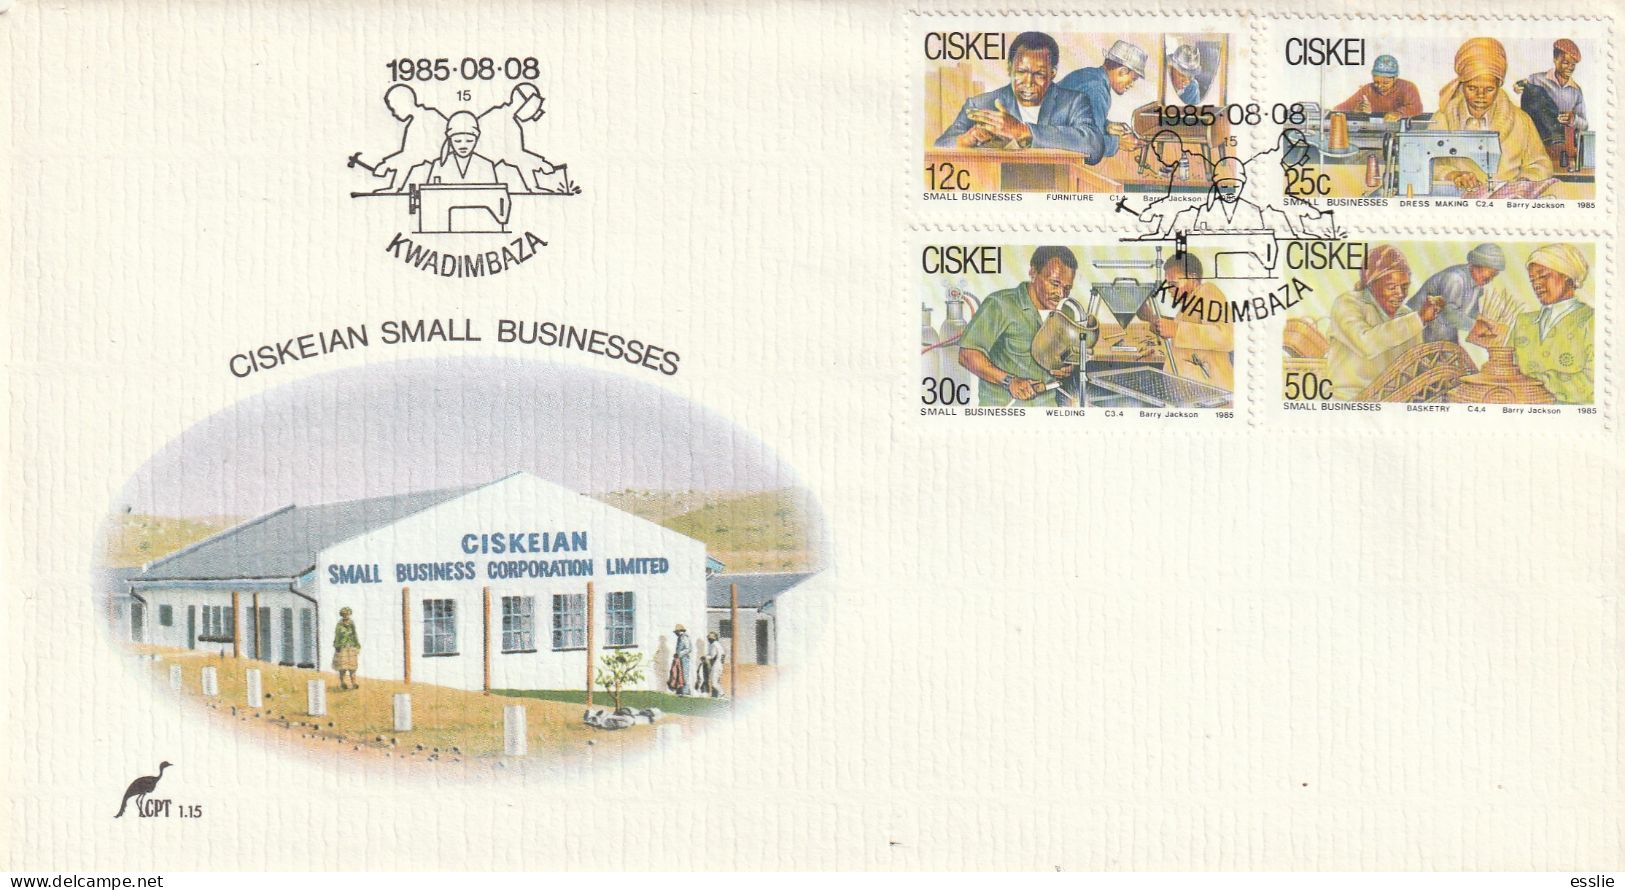 Ciskei - 1985 - Small Businesses - First Day Cover - Small - Ciskei